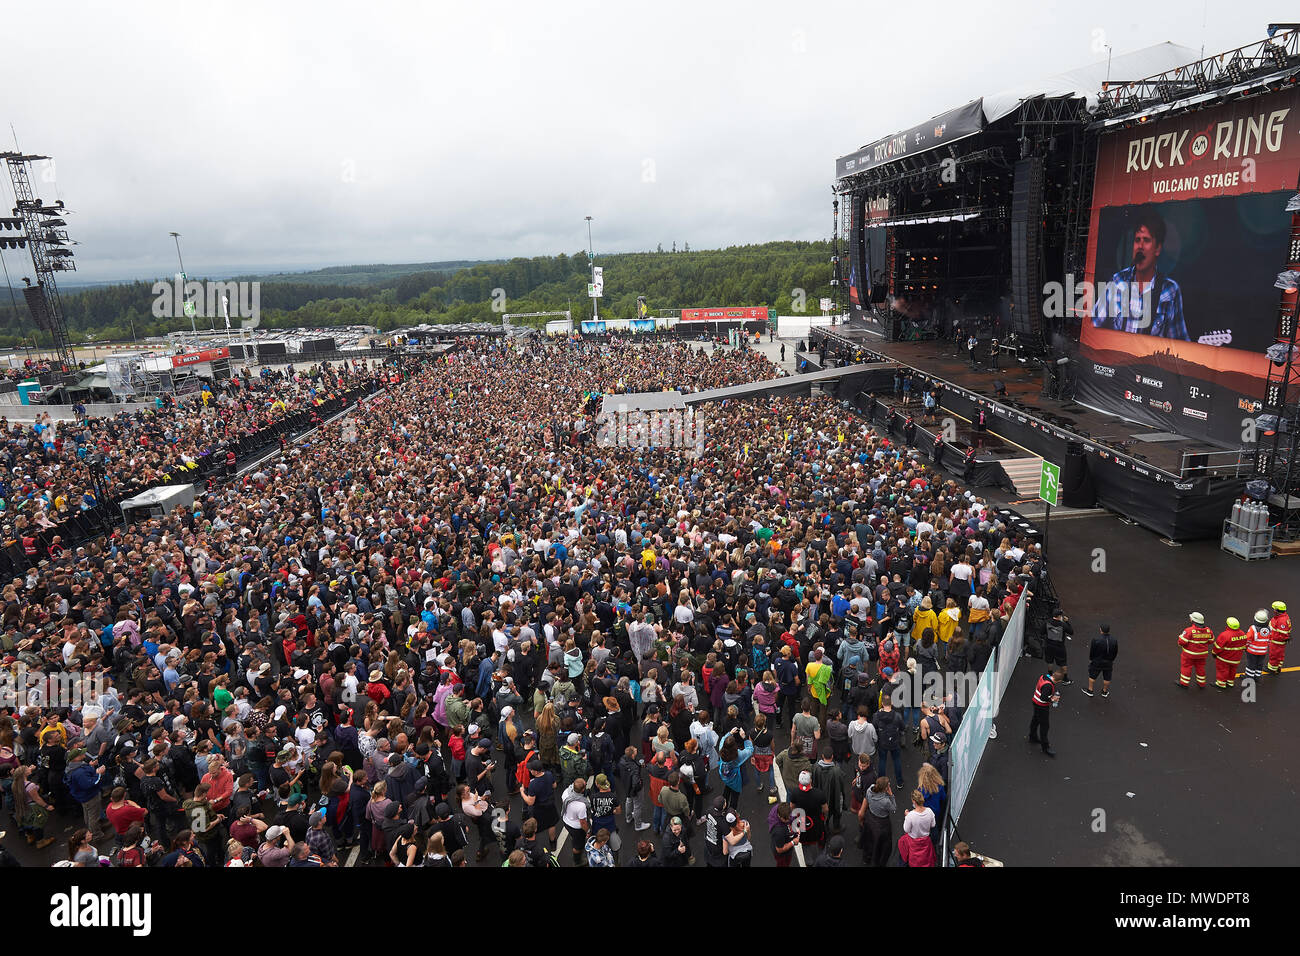 01 June 2018, Germany, Nuerburg: Festival goers gather in front of the stage of music festival 'Rock am Ring', which features 80 bands on 3 different stages. Photo: Thomas Frey/dpa Photo - Alamy